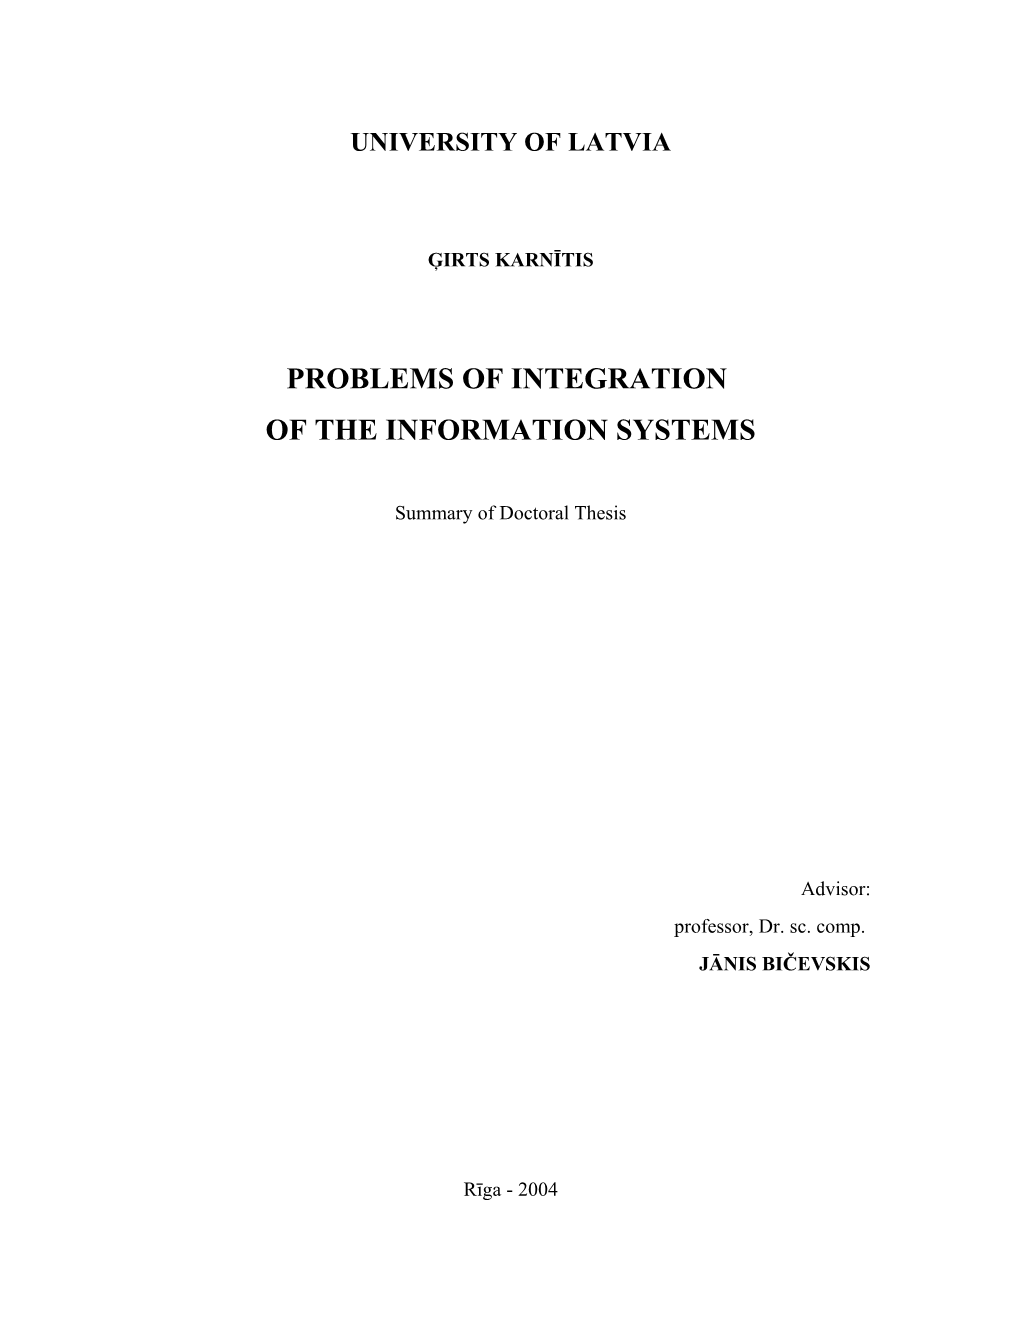 Girts Karnitis. Problems of Integration of the Information Systems. Doctoral Thesis For